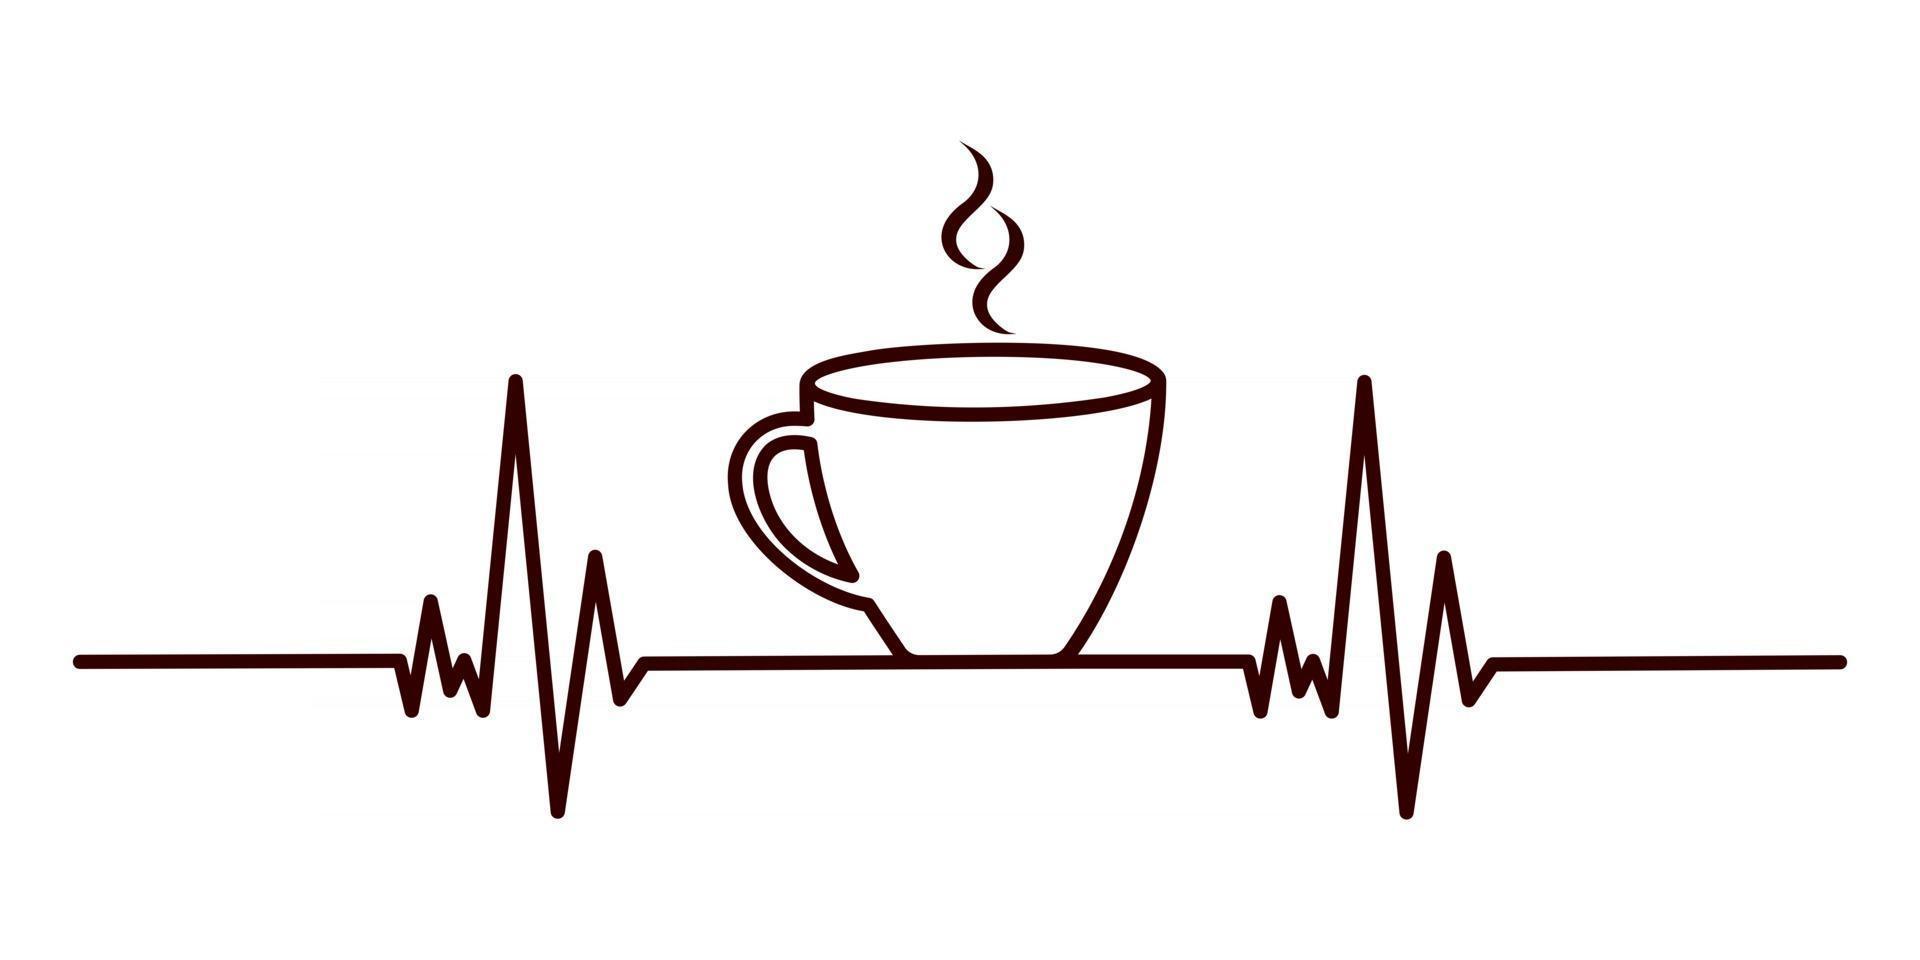 Coffee heartbeat concept. Cardiogram line and cup of espresso vector